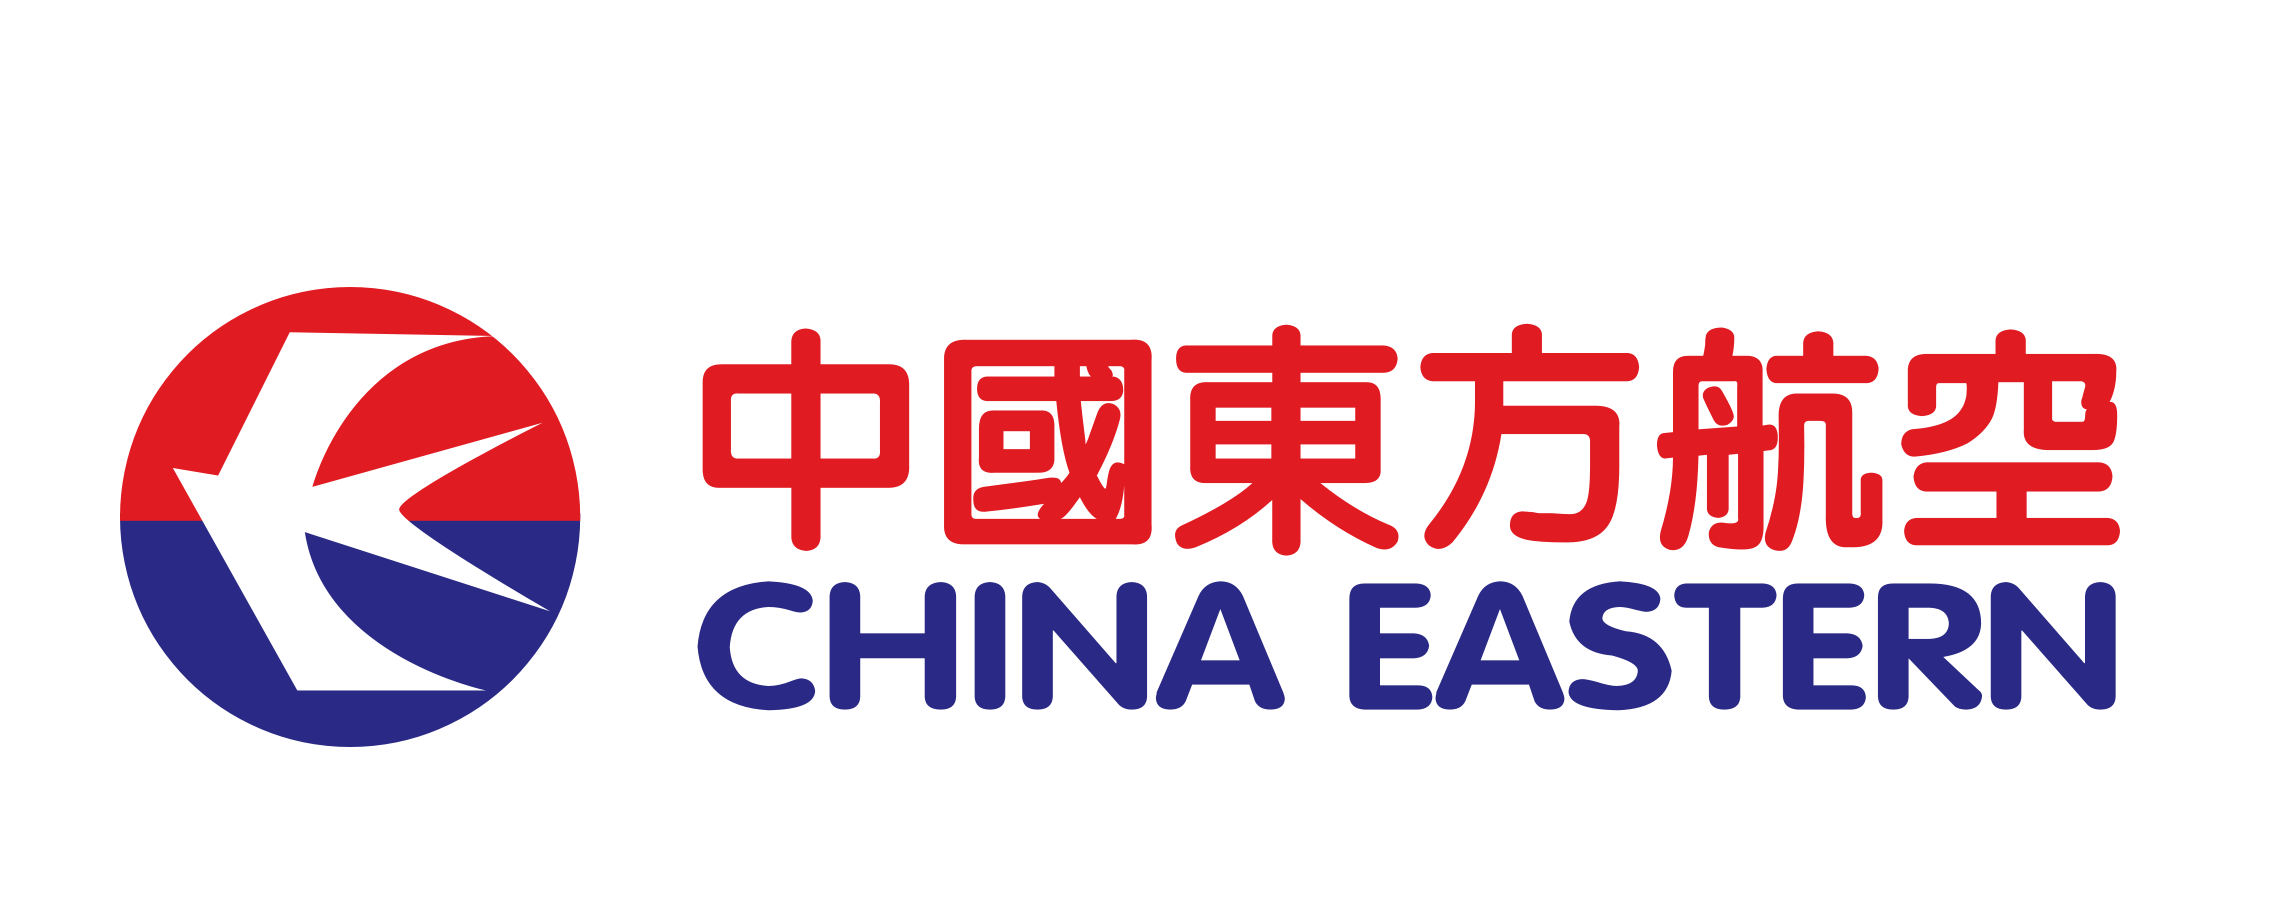 China Eastern Airlines - 10410